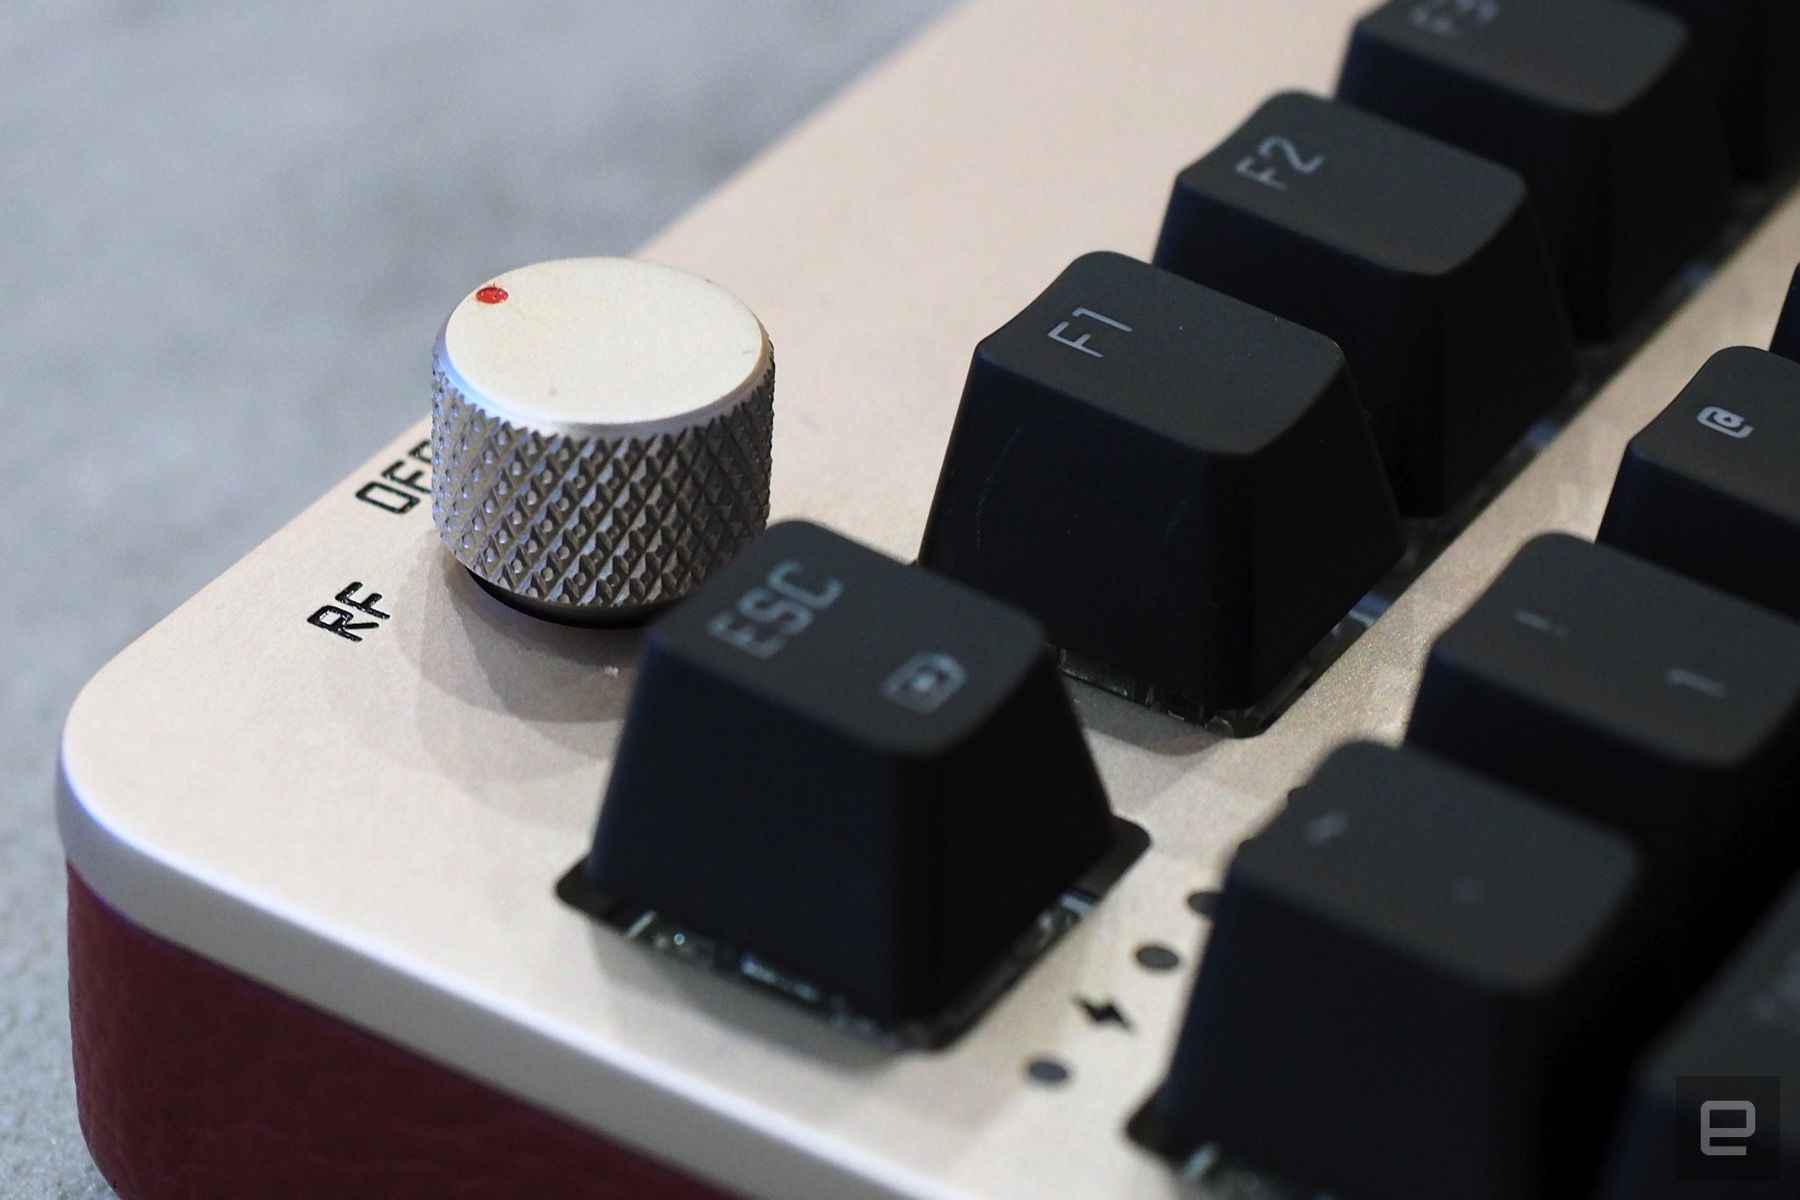 ENGADGET: AZIO’s gorgeous Iris keyboard is inspired by vintage cameras